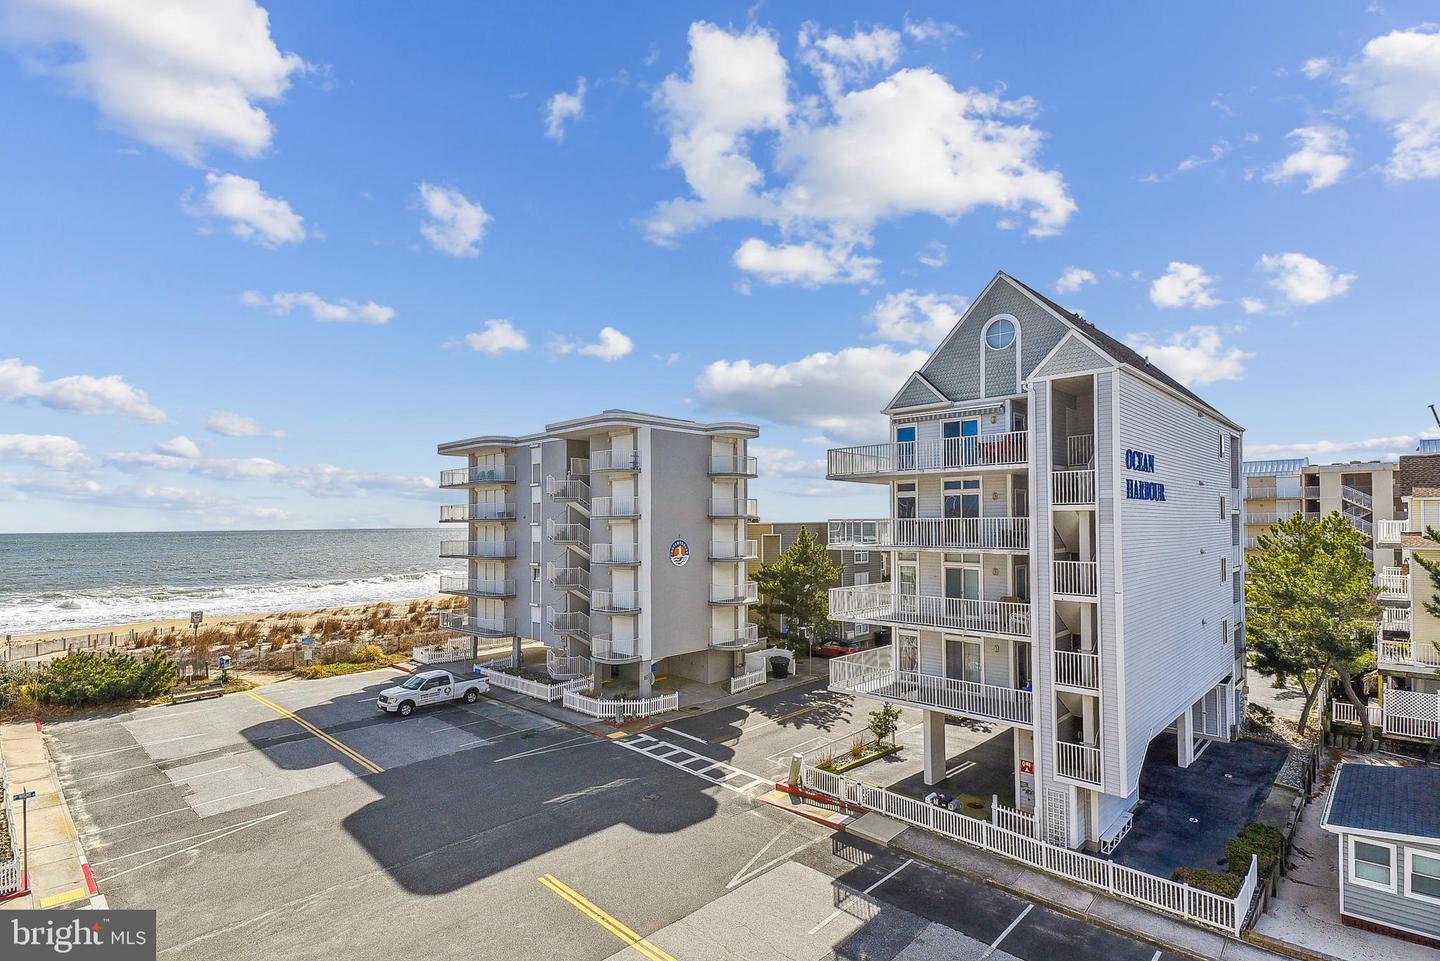 MDWO2019340-802916989414-2024-03-11-15-00-56 14301 Wight St #201 | Ocean City, MD Real Estate For Sale | MLS# Mdwo2019340  - 1st Choice Properties